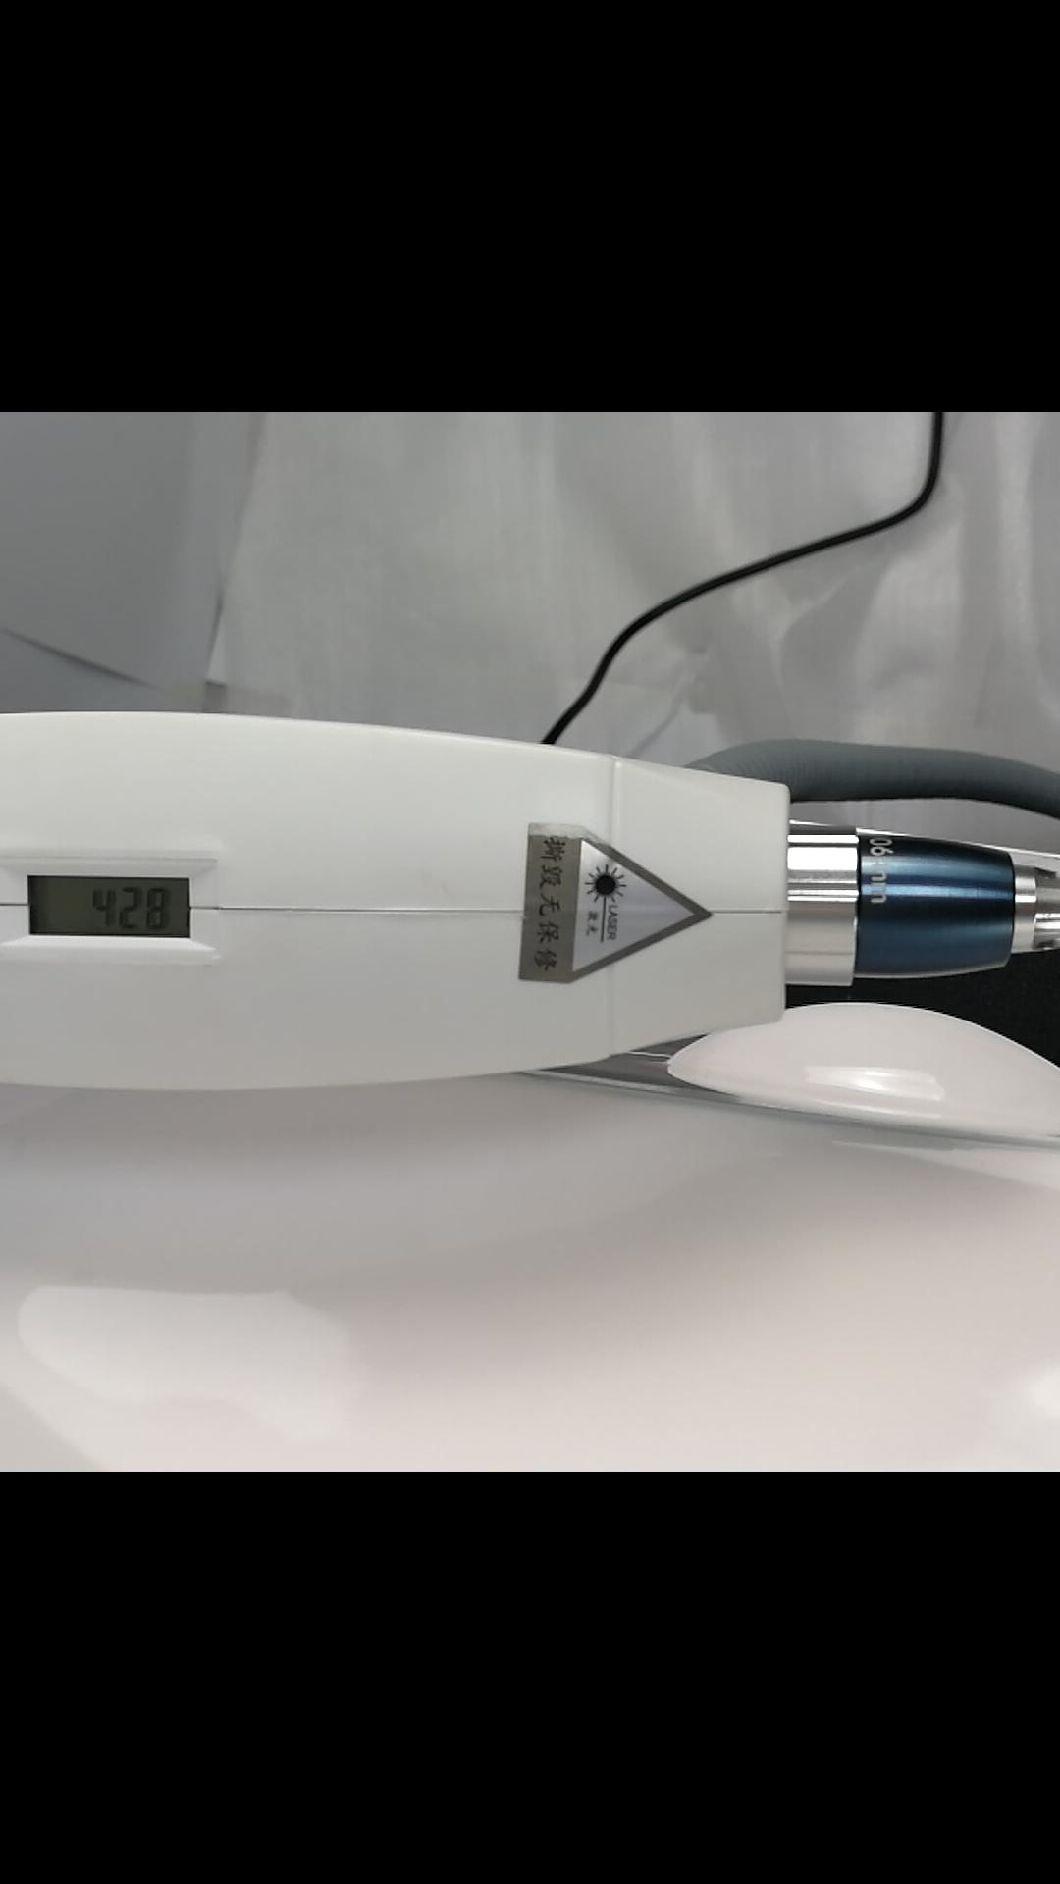 2022 Hot Sale Q Switch ND YAG Laser Tattoo Removal Beauty Machine 1064nm 532nm 1320nm Pigments Removal